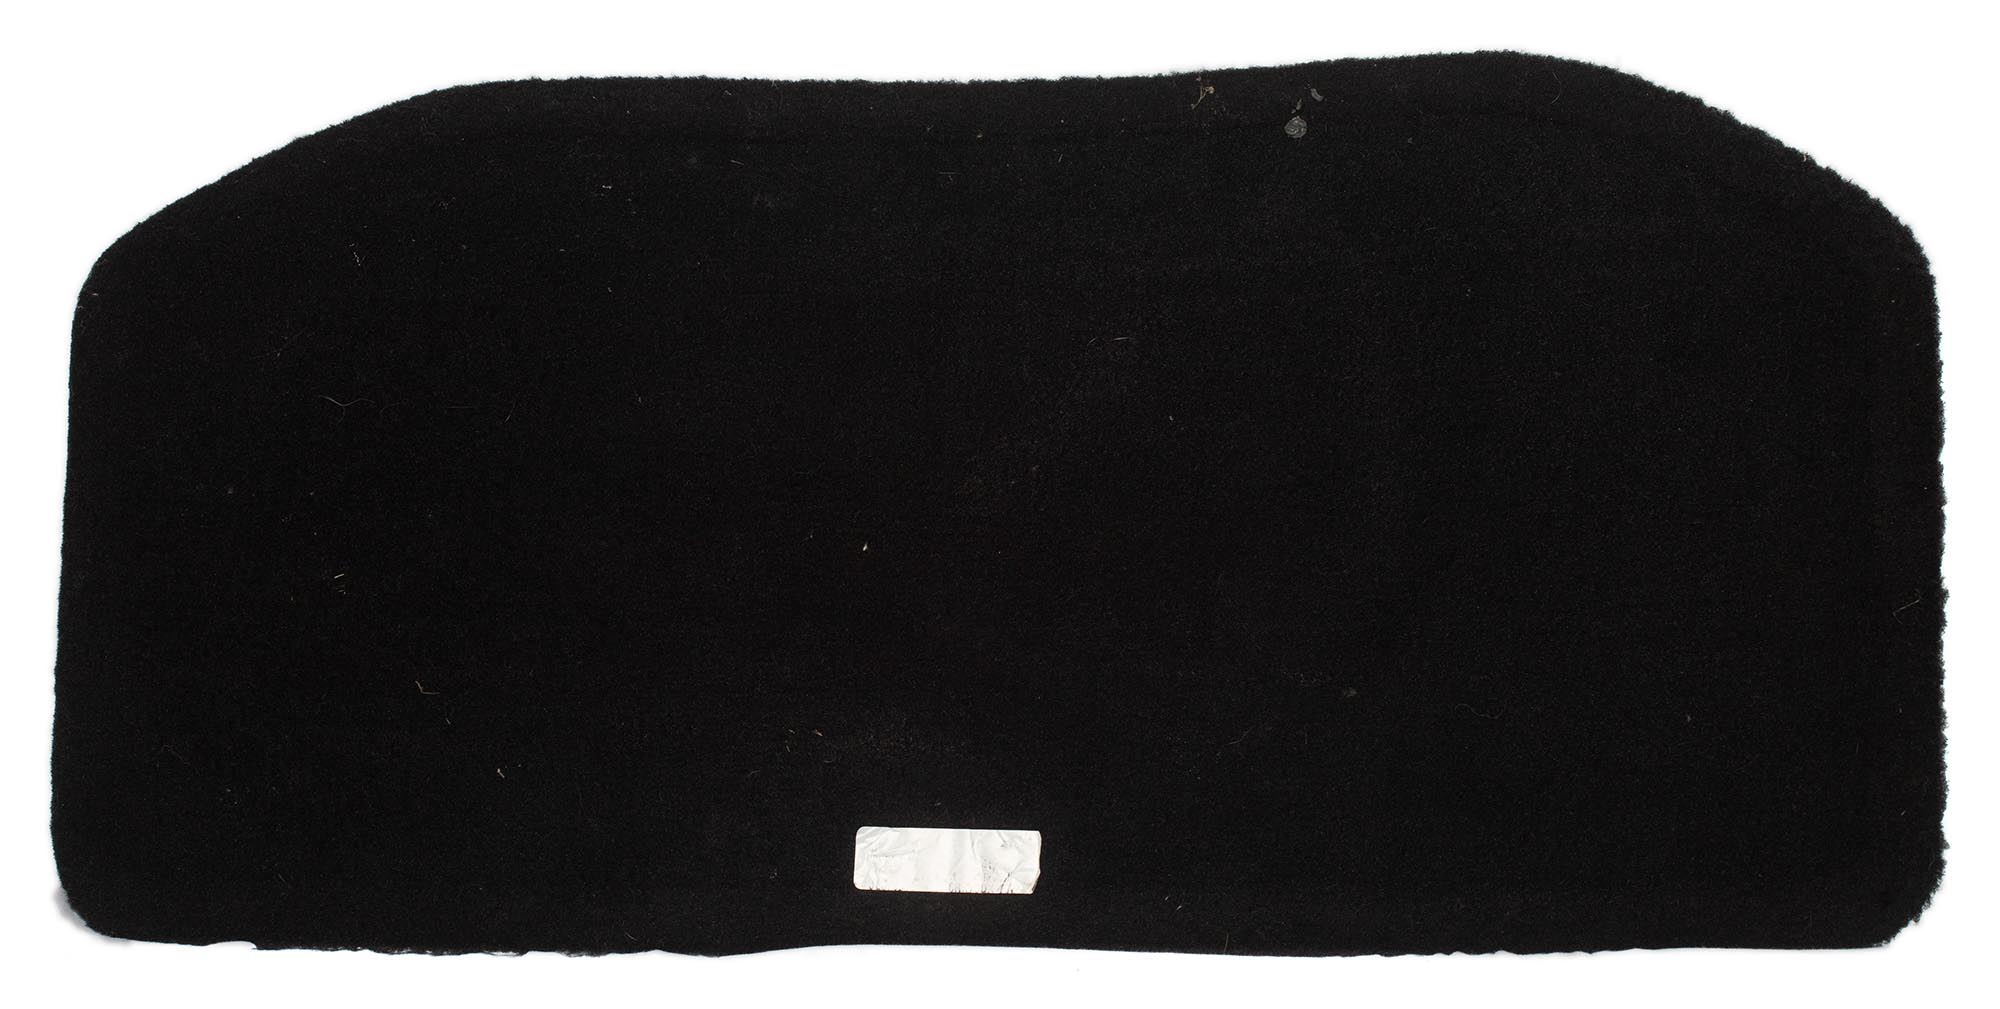 Used trunk mat for 2014-18 JK Jeep